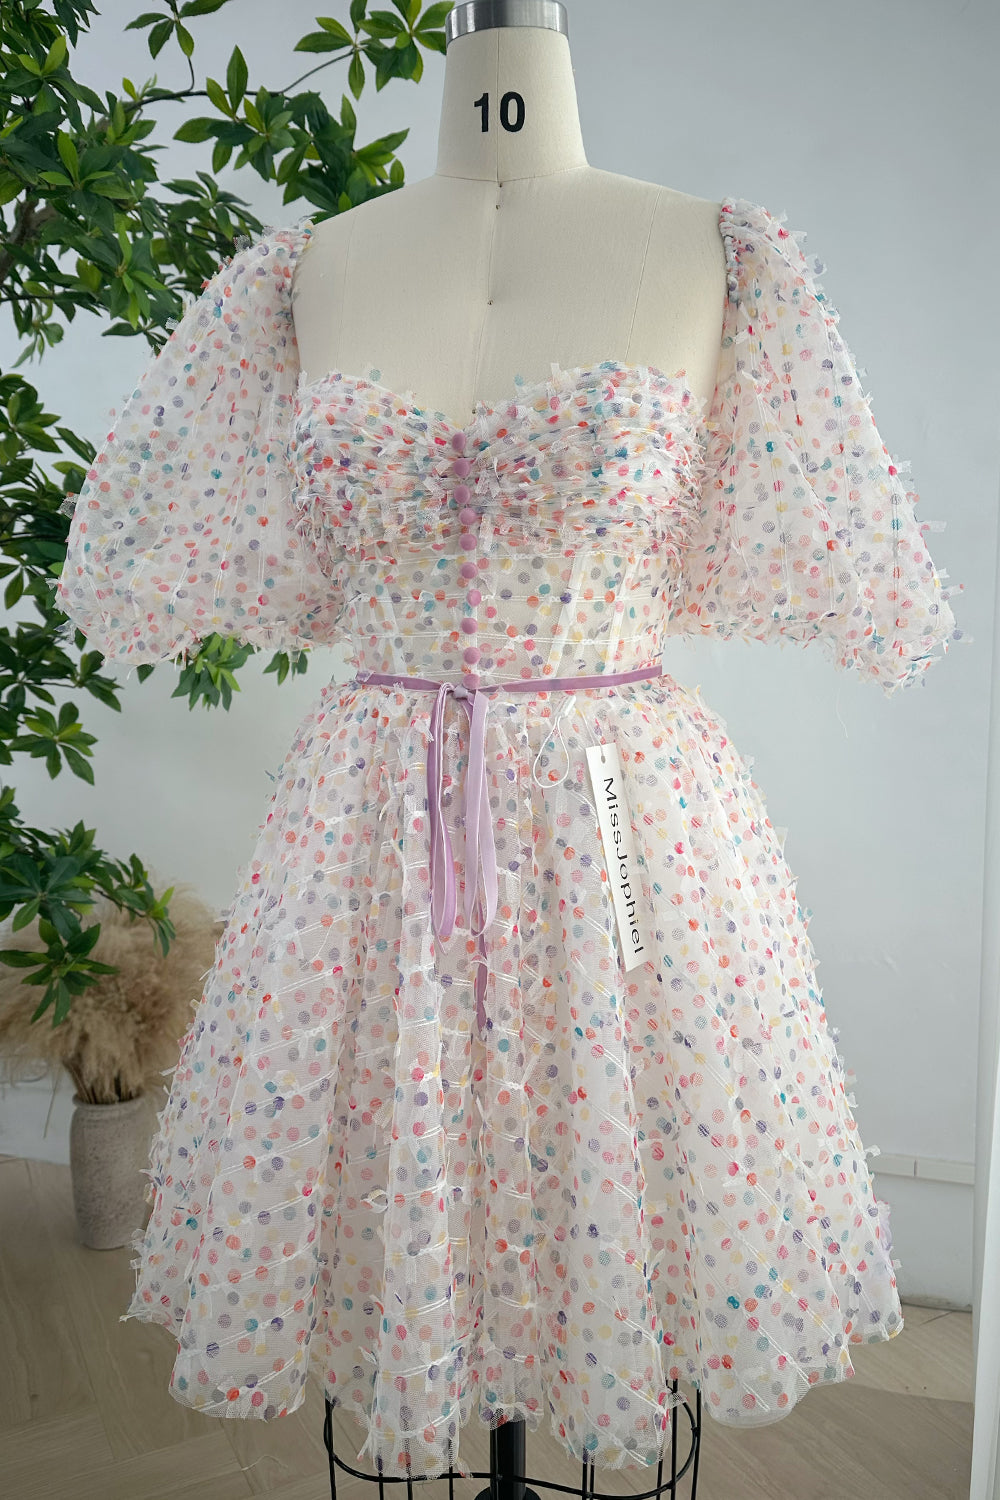 Retro Colorful Polka Dots Dress with Removable Puff Sleeves, Tie Straps